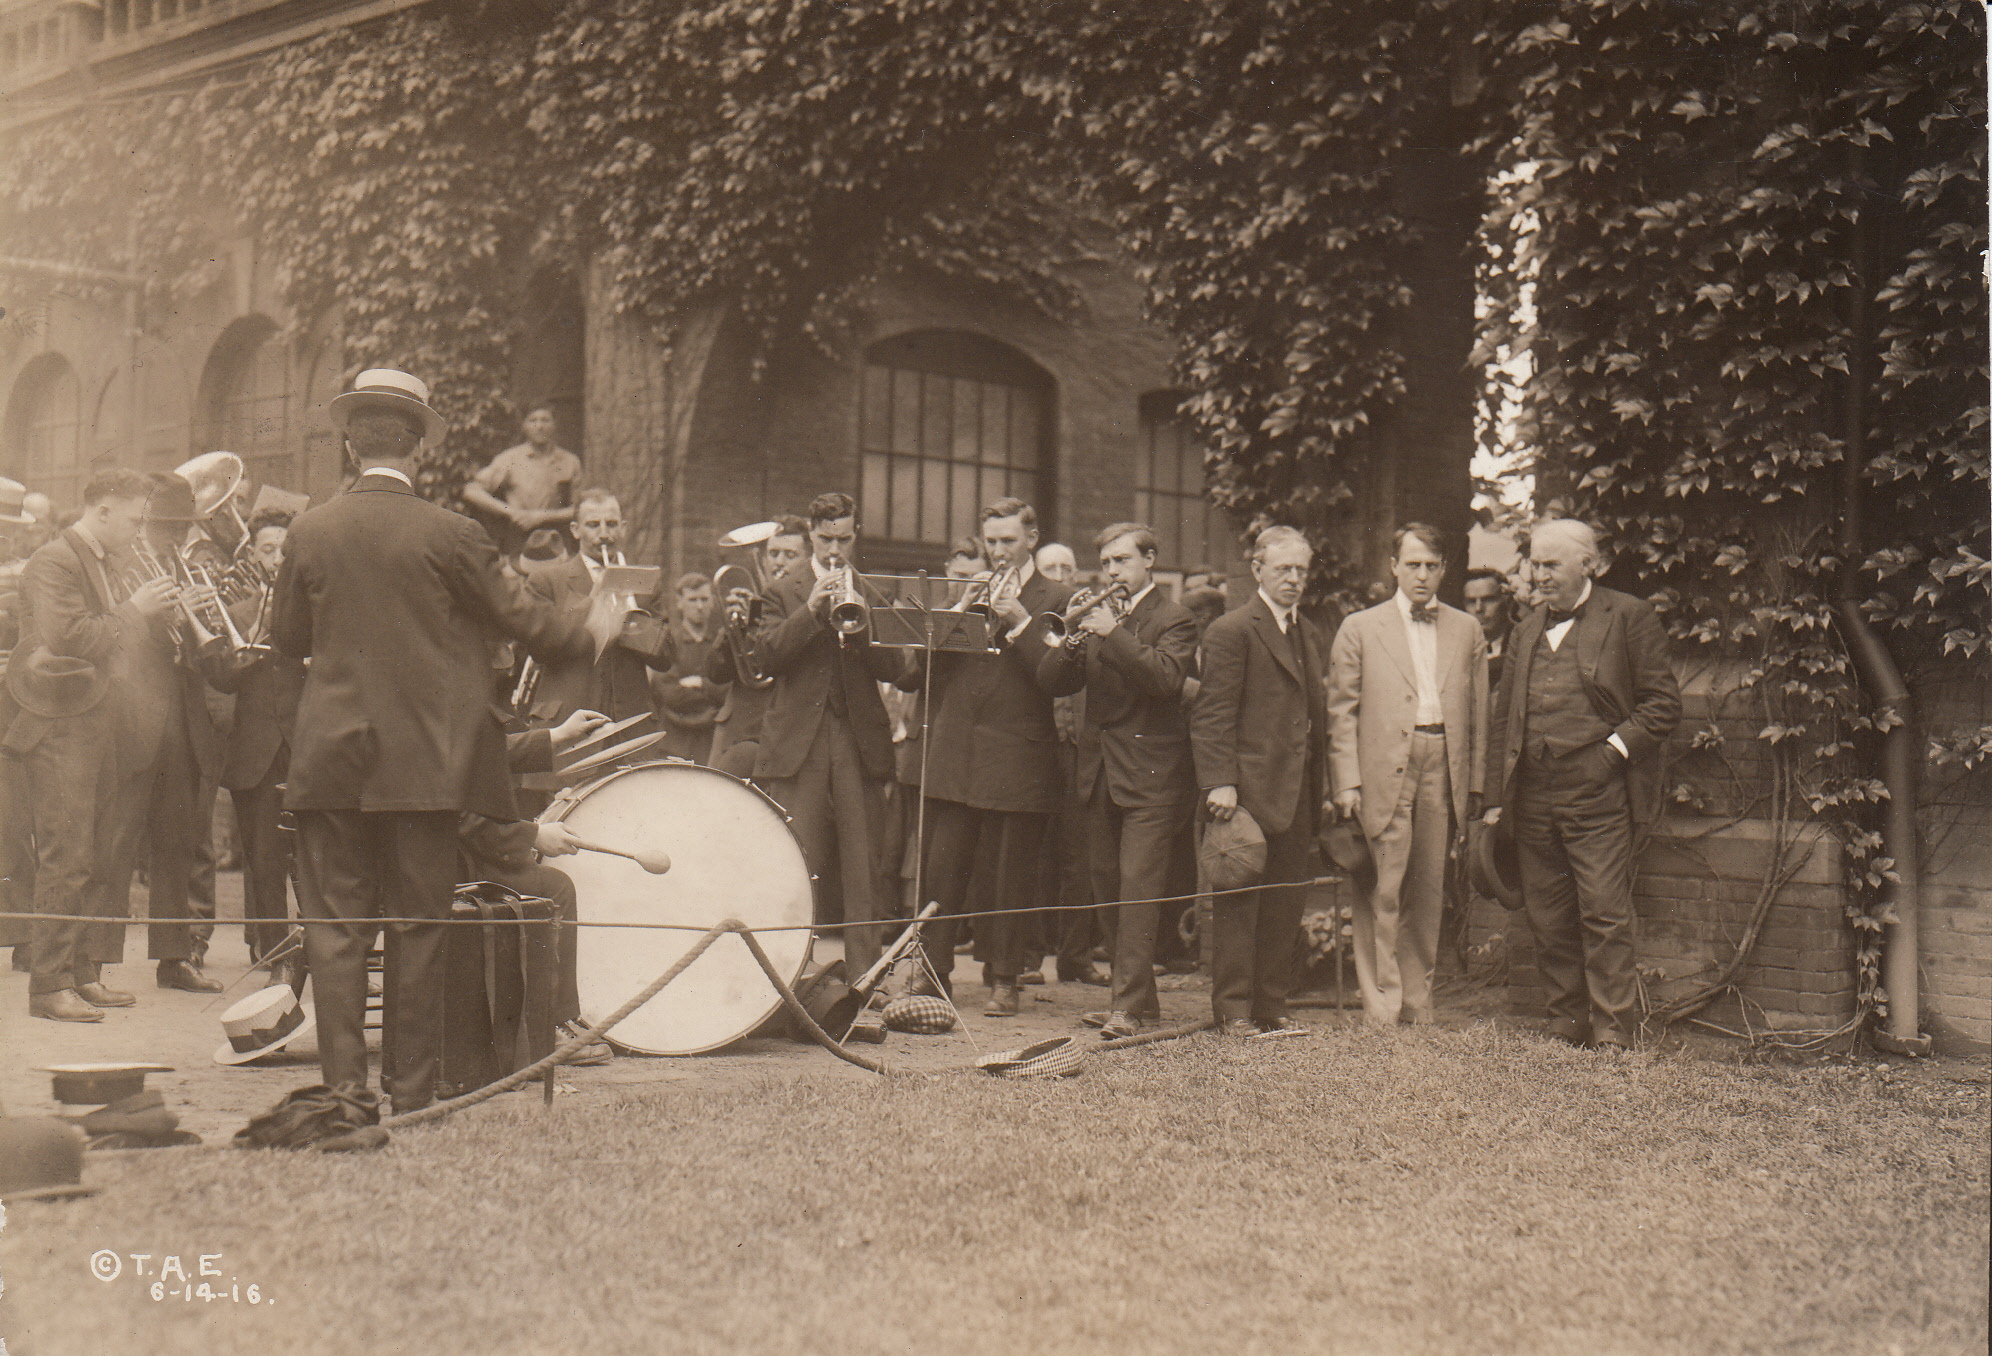 William H. Meadowcroft, Miller Reese Hutchison, Thomas Edison, and the Edison Band at the flag raising at the Lab.